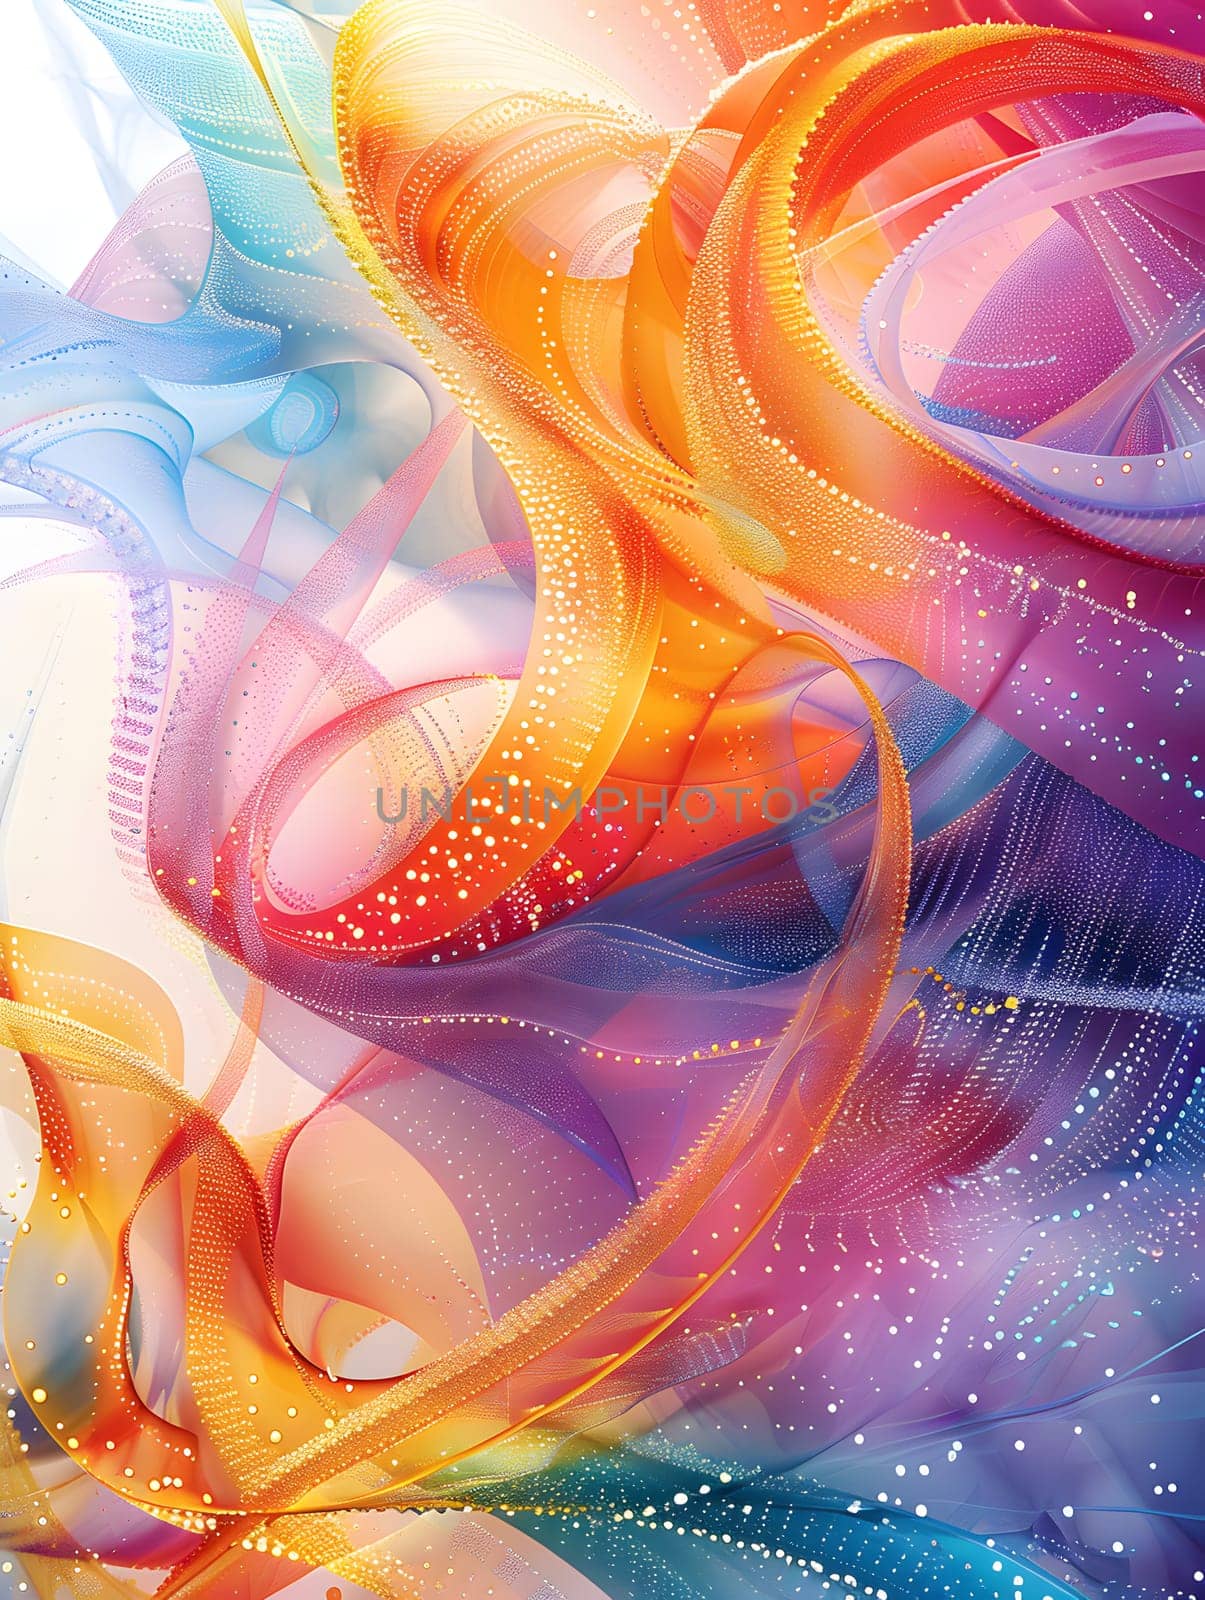 A vibrant close up of a colorful ribbon with shades of water, purple, orange, pink, violet, magenta, and electric blue. The pattern resembles artwork painted on a white background